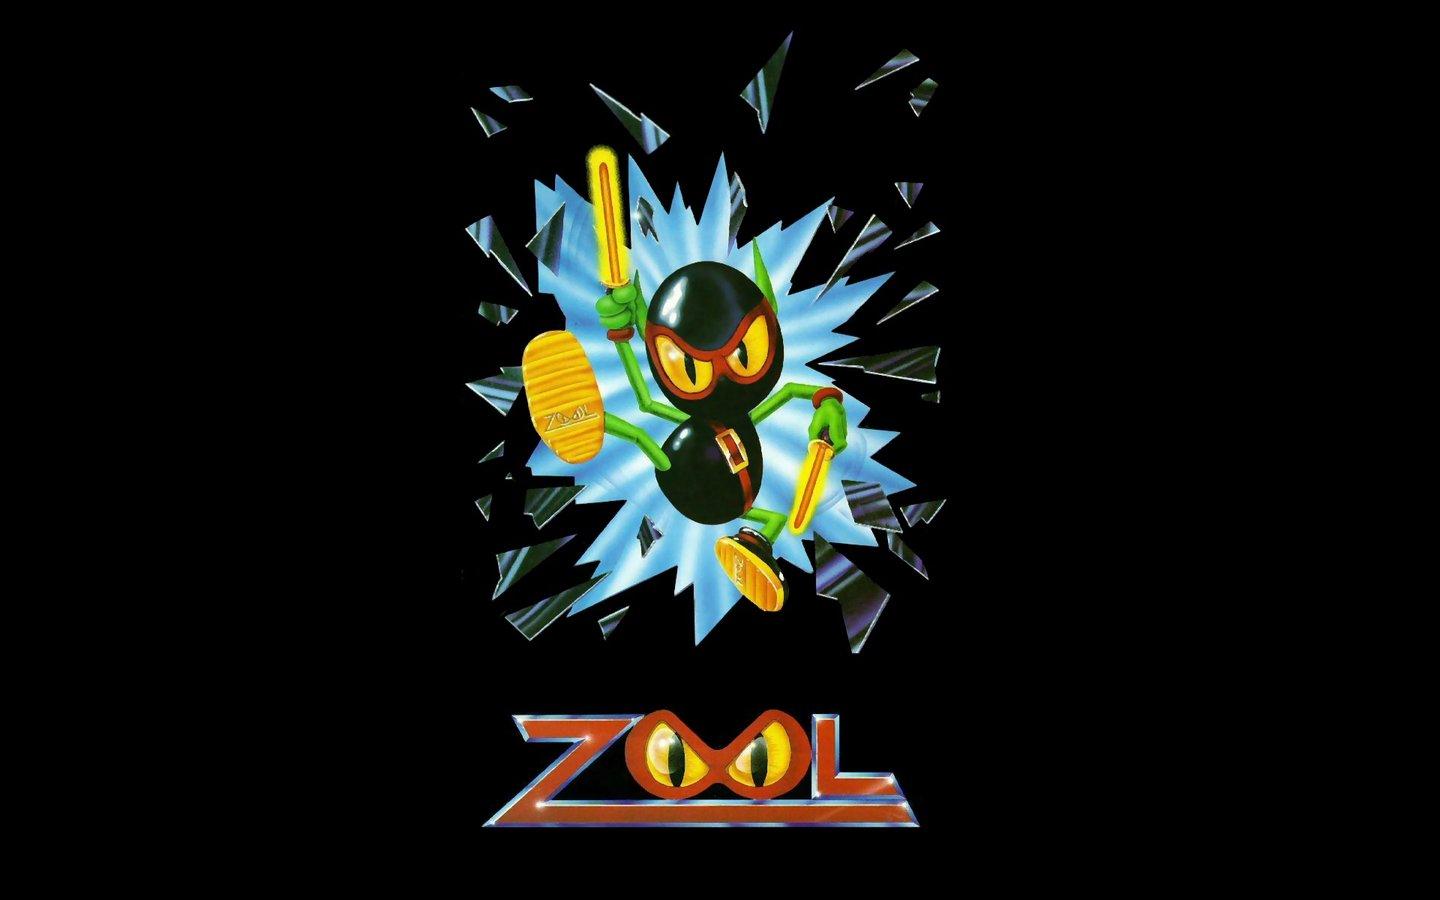 Wallpaper: Zool Master System (1 of 2)